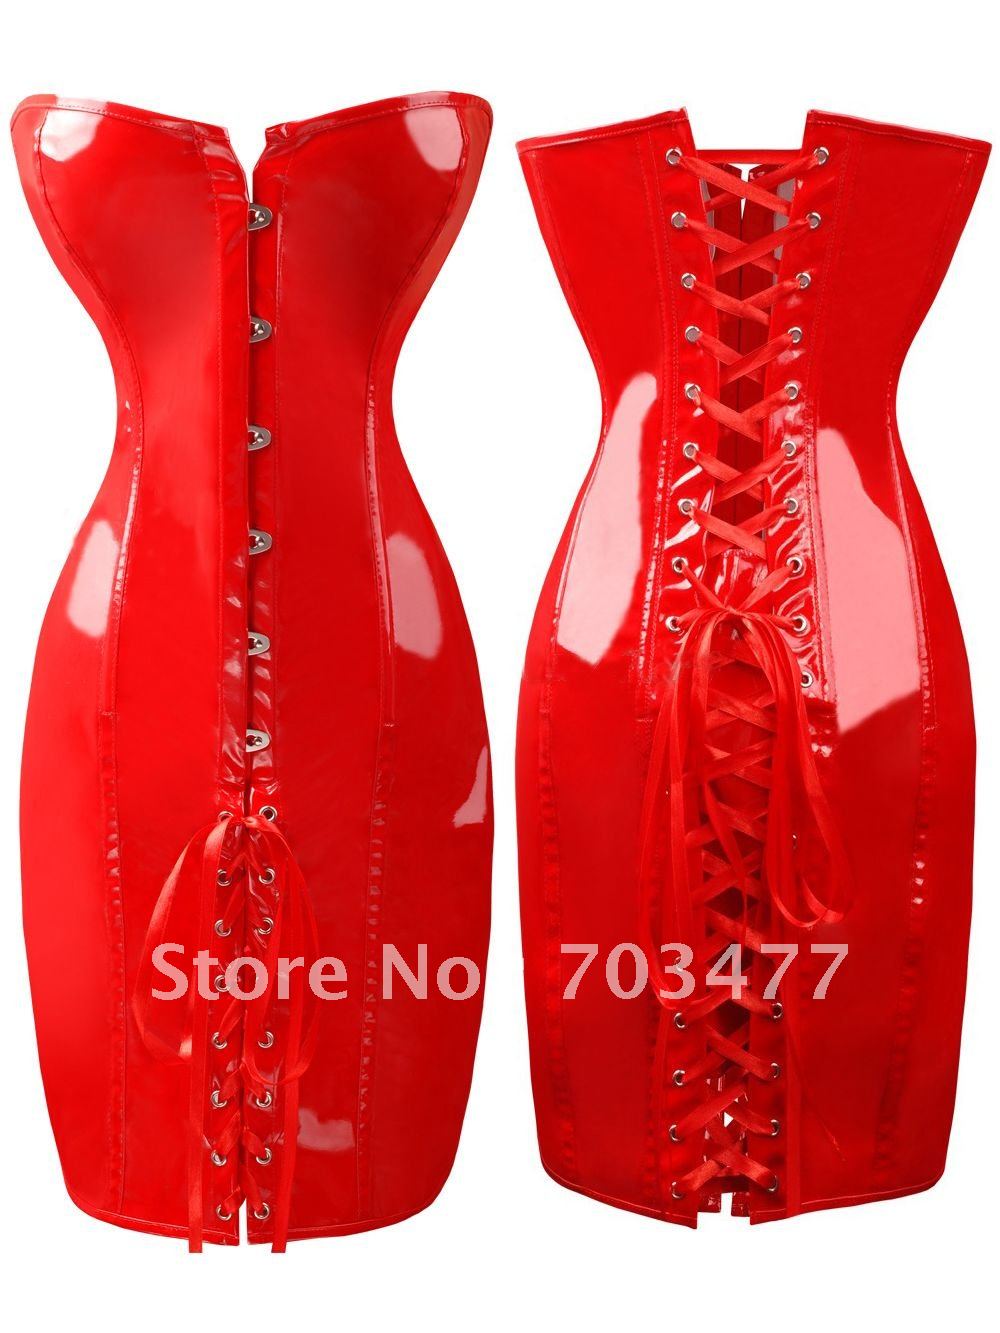 Red sexy corset with lace-up back for cinching wholesale and retailer high quality low price fast delivery fast delivery